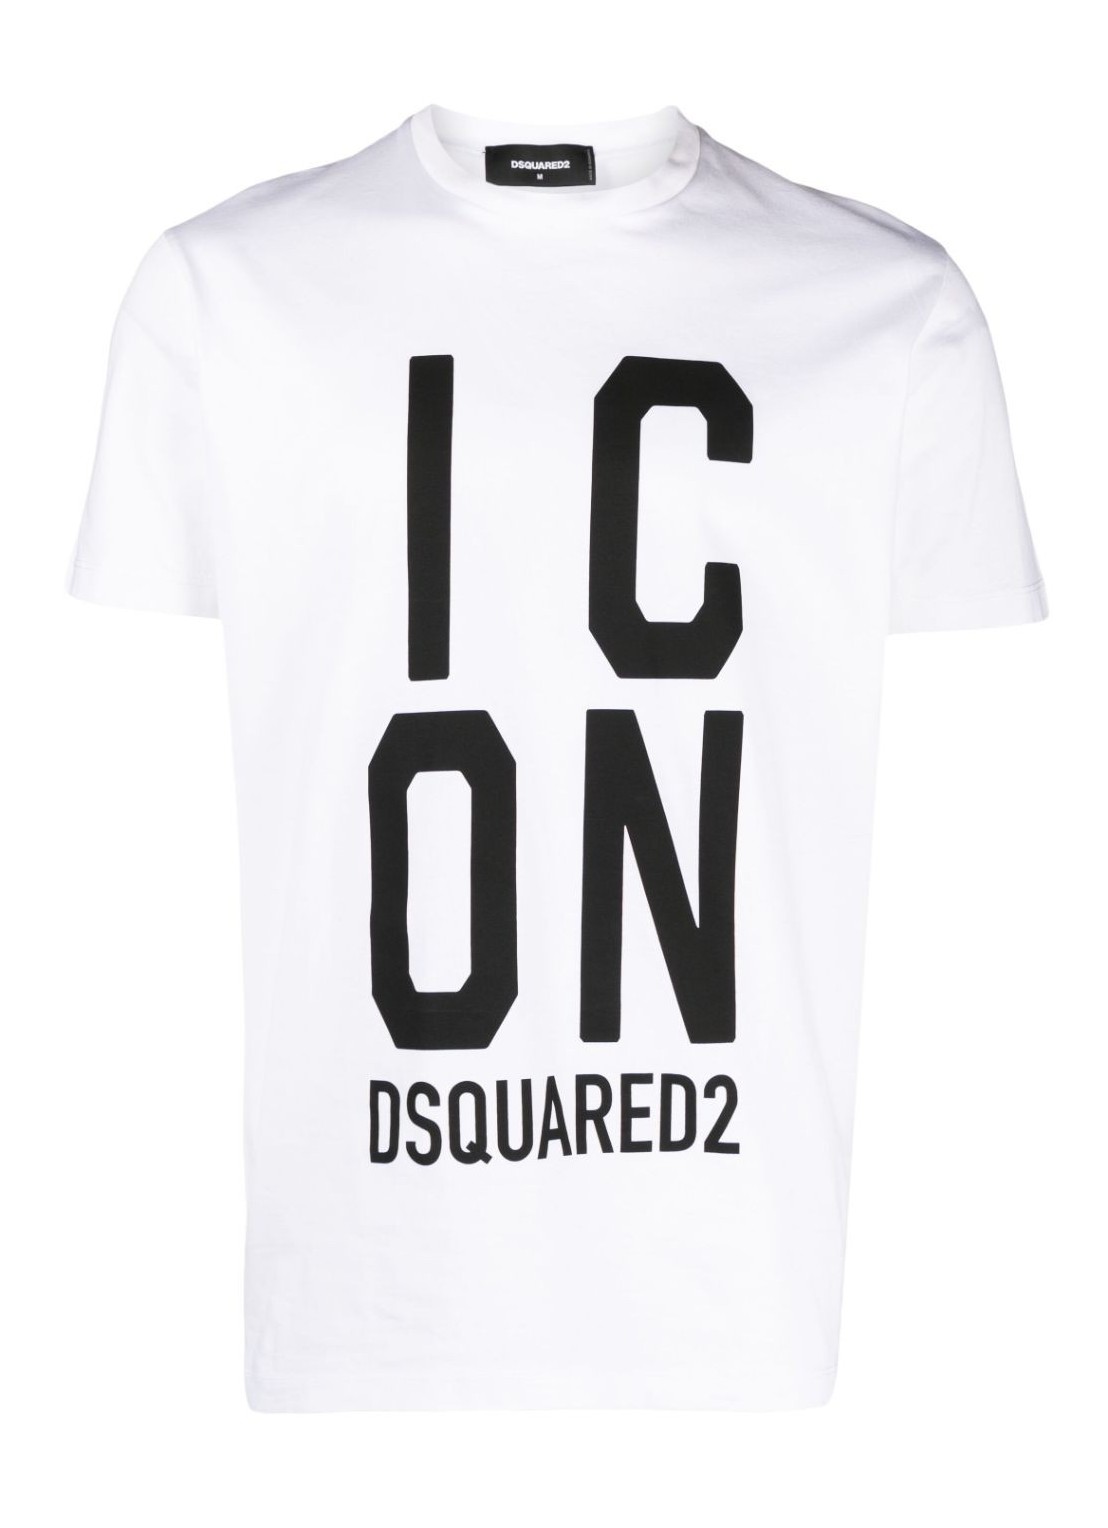 Camiseta dsquared t-shirt man icon squared cool fit tee s79gc0077s23009 100 talla M
 